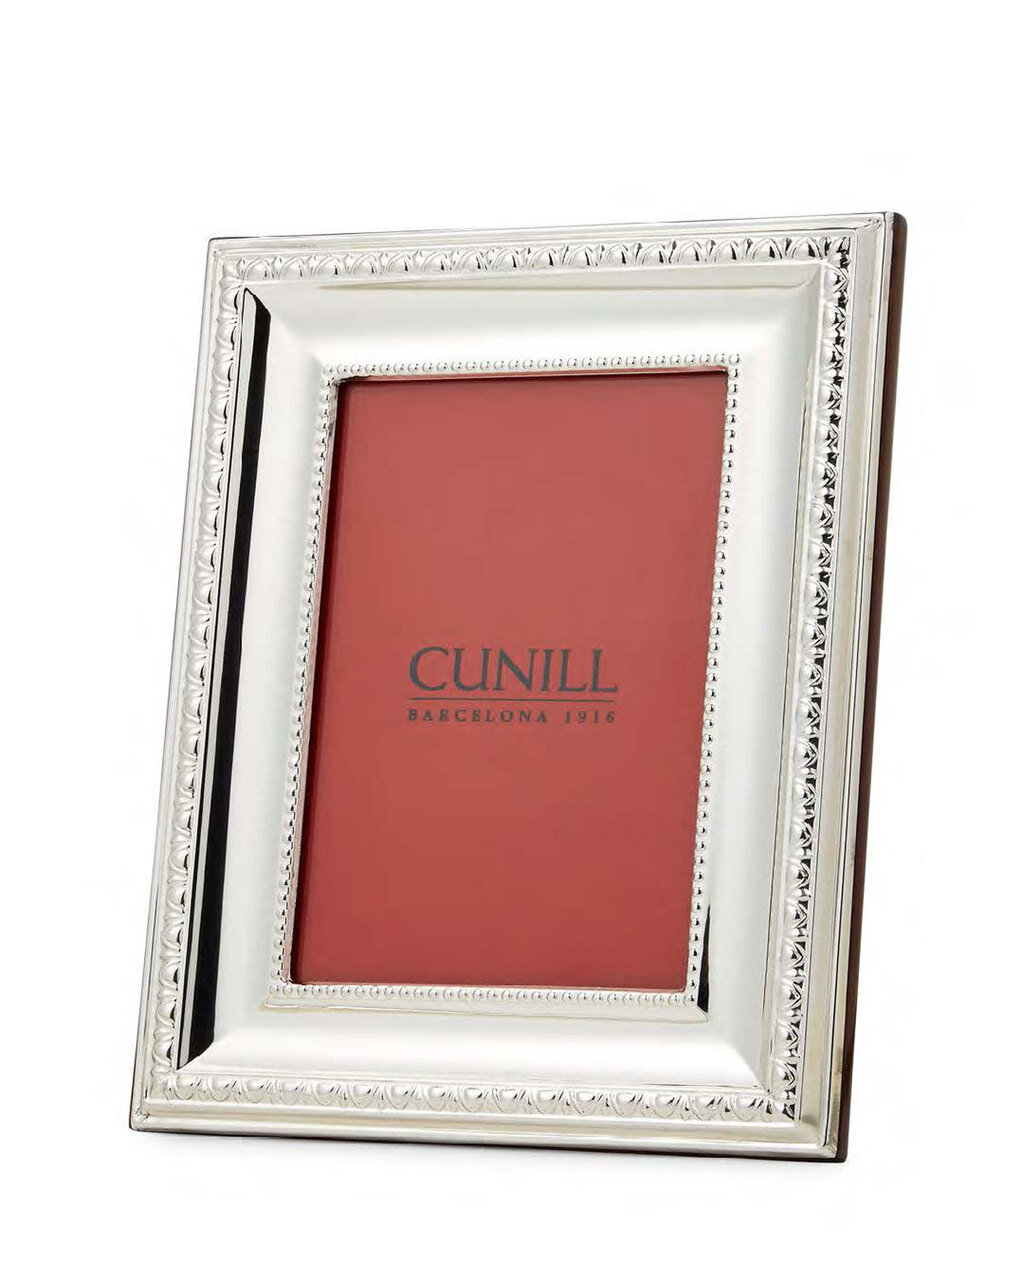 Cunill Prestige 4 x 6 Inch Picture Frame - Sterling Silver